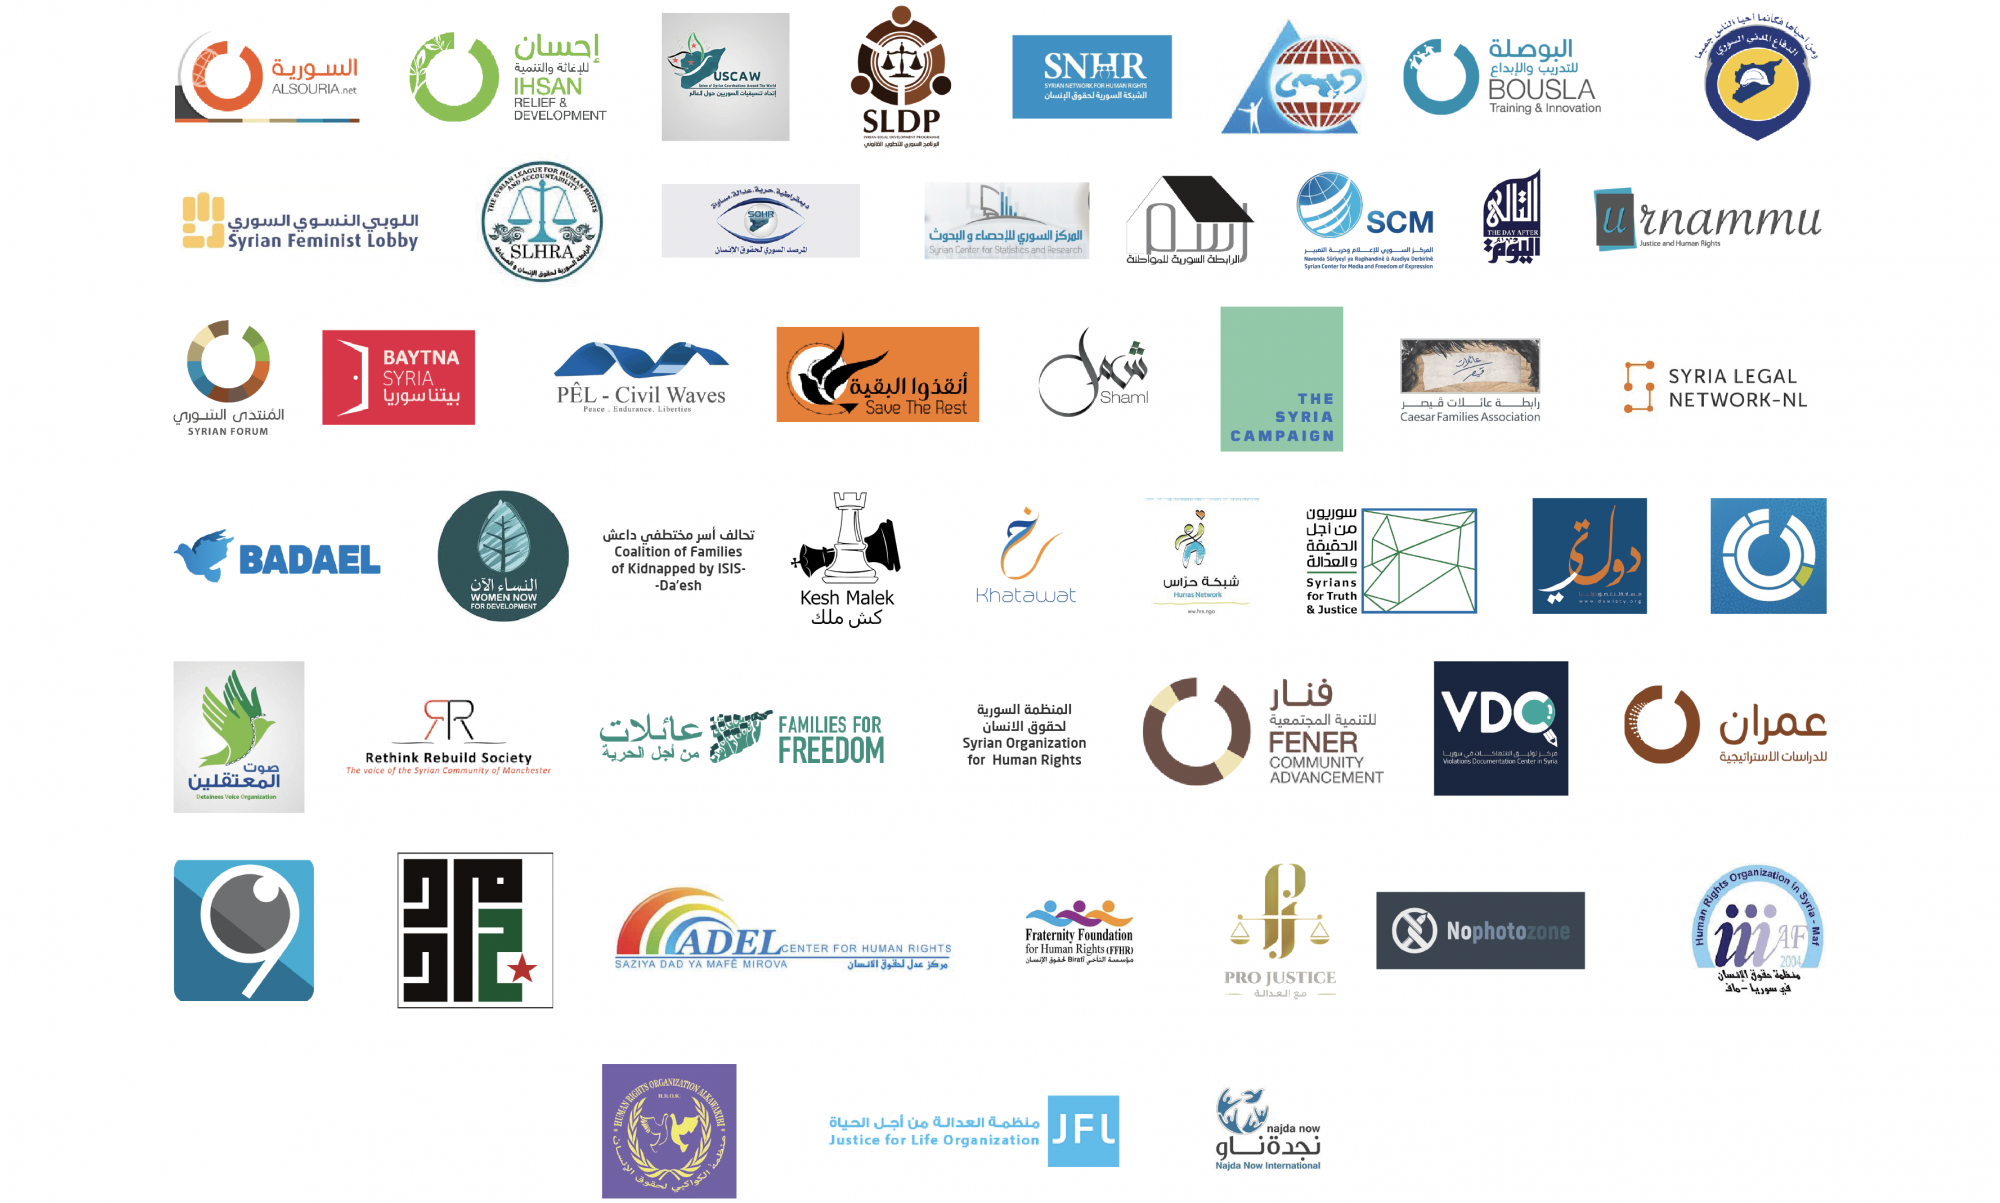 50 civil society organizations call for immediate action in the Security Council on the issue of the missing in Syria